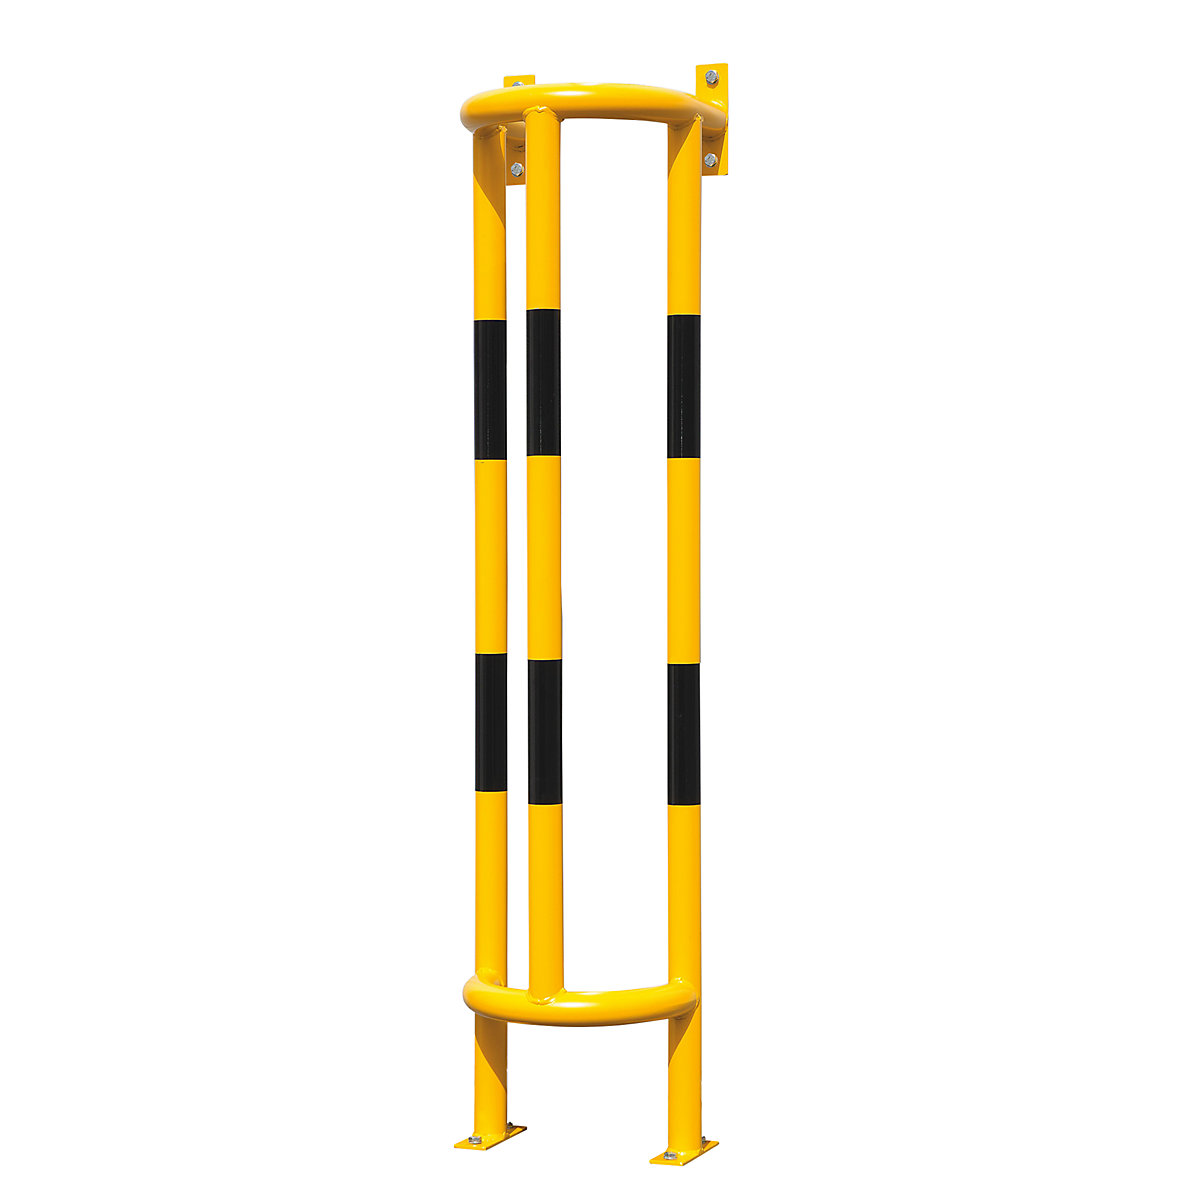 Crash protection for pipes, wall/floor mounting, HxWxD 1500 x 350 x 300 mm